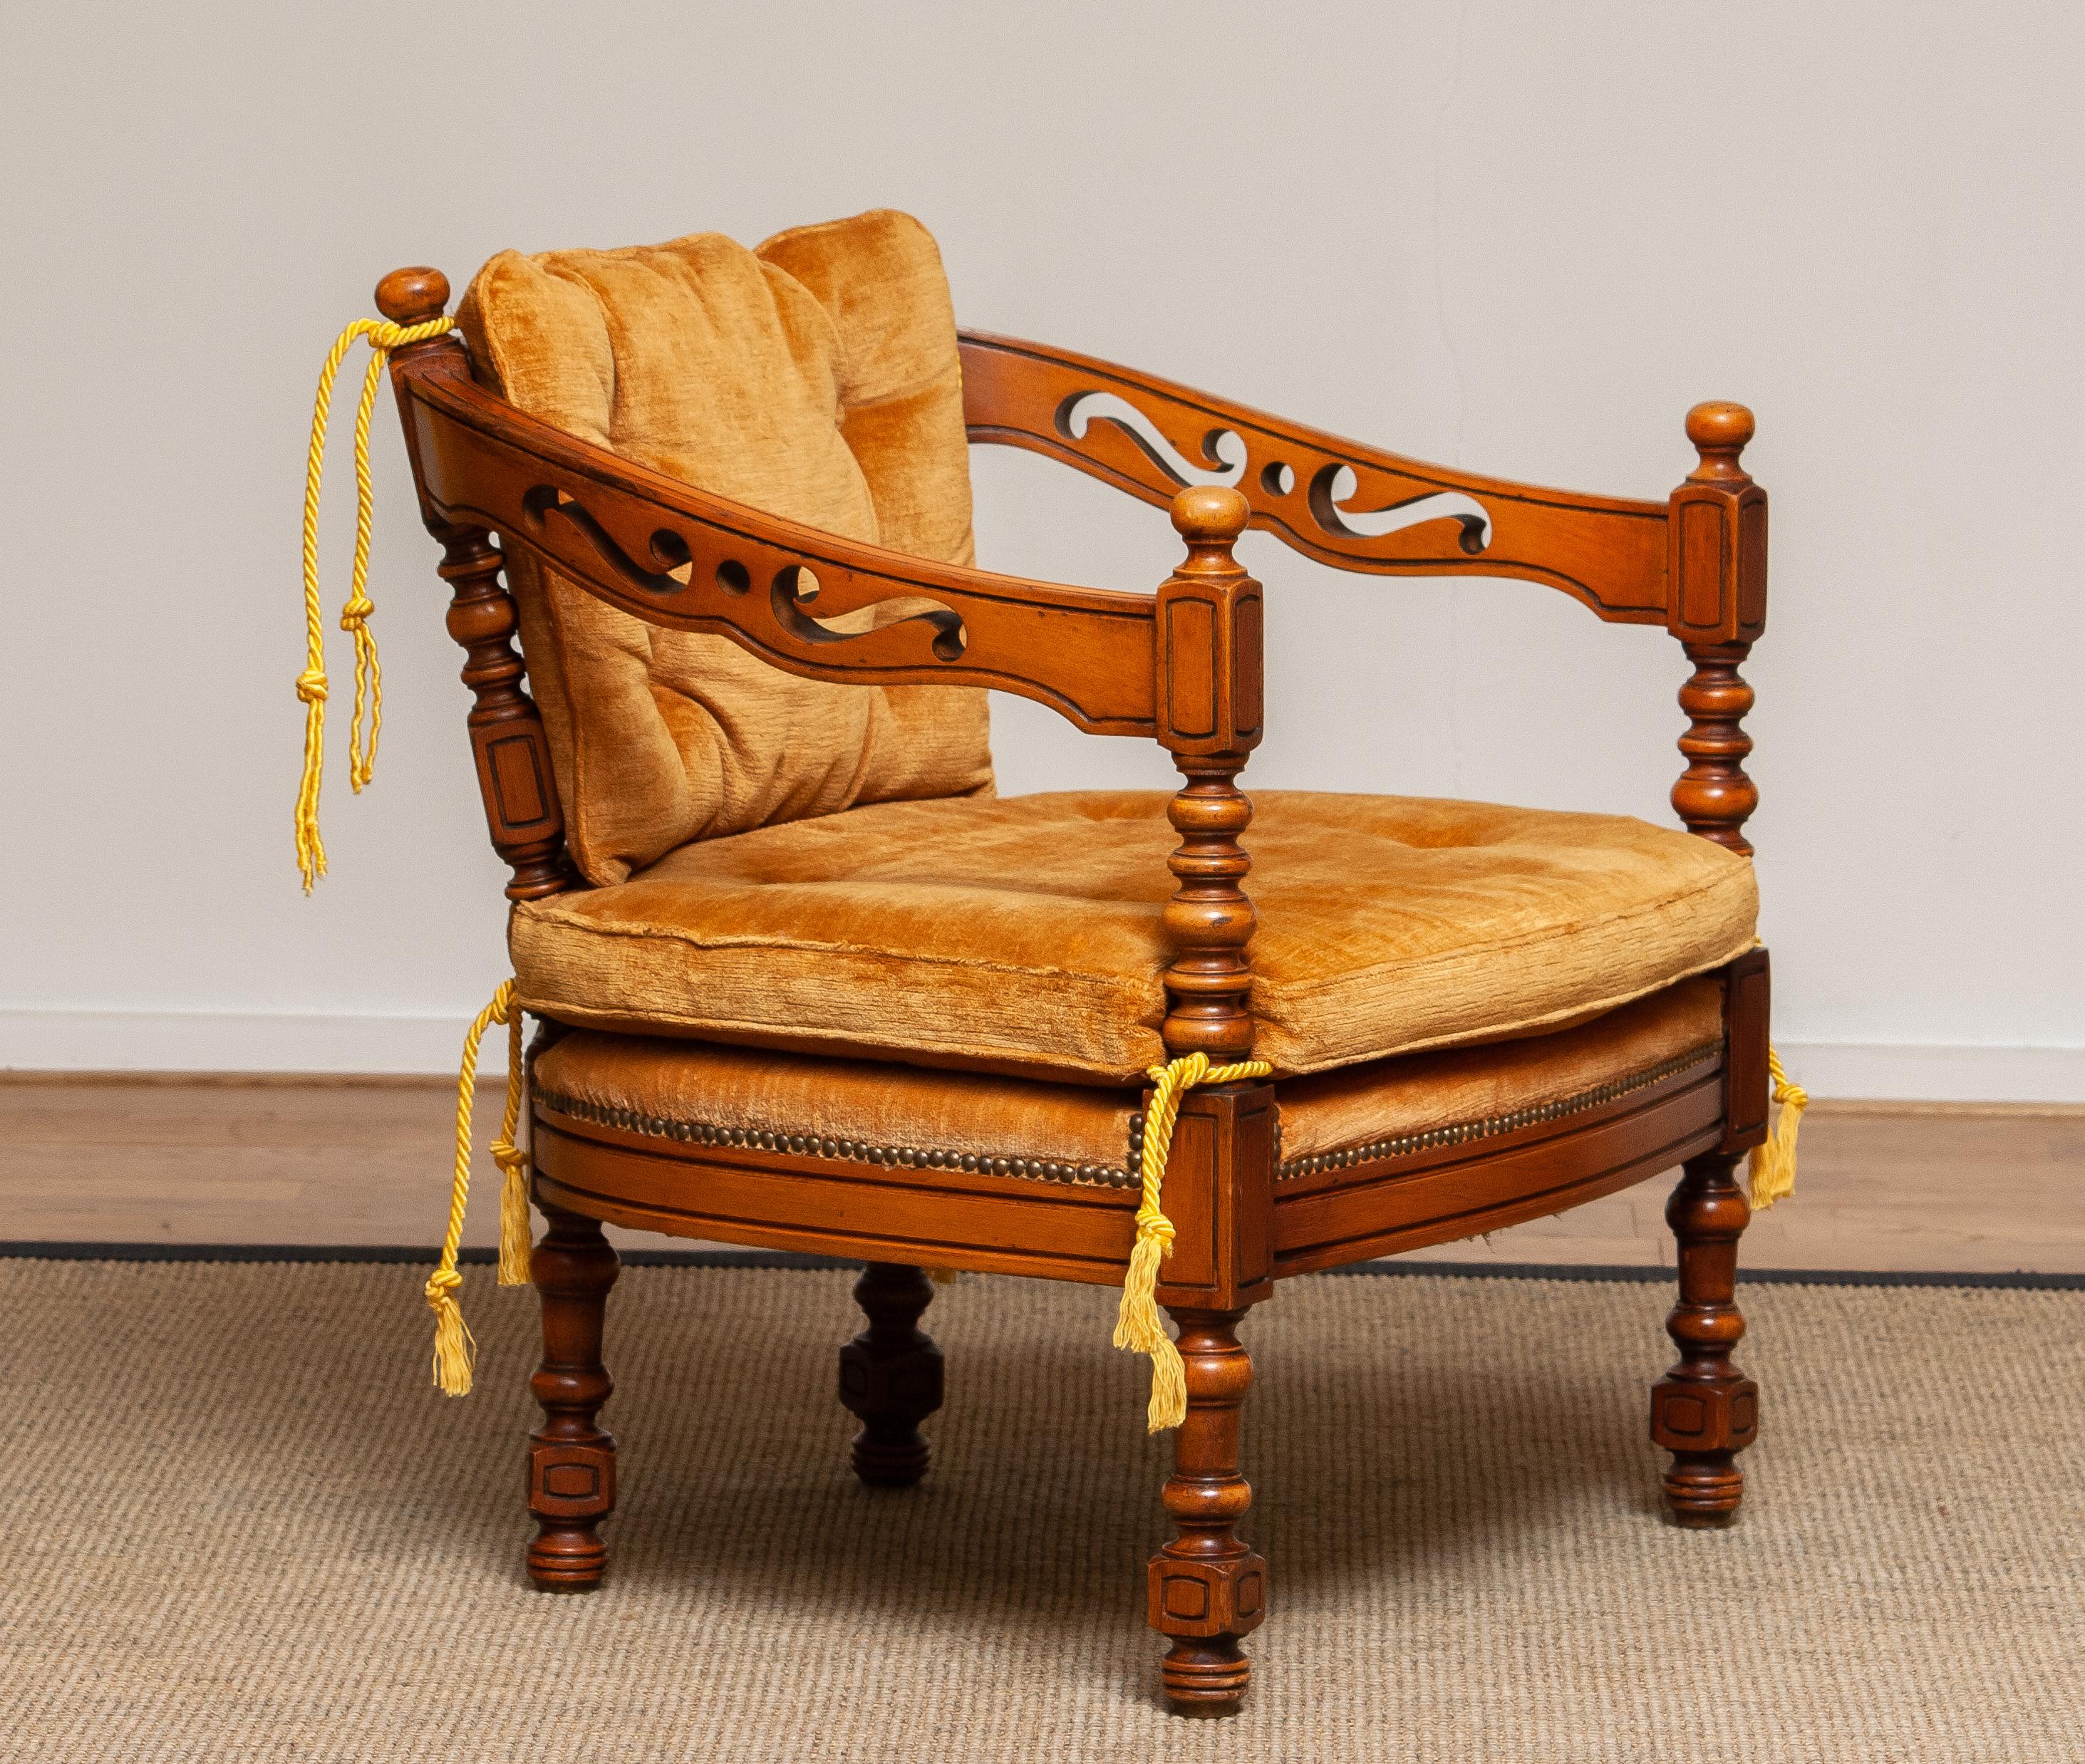 1970 Italian Giorgetti Arm / Lounge Chair in Amber of the Gallery Collection 1 1